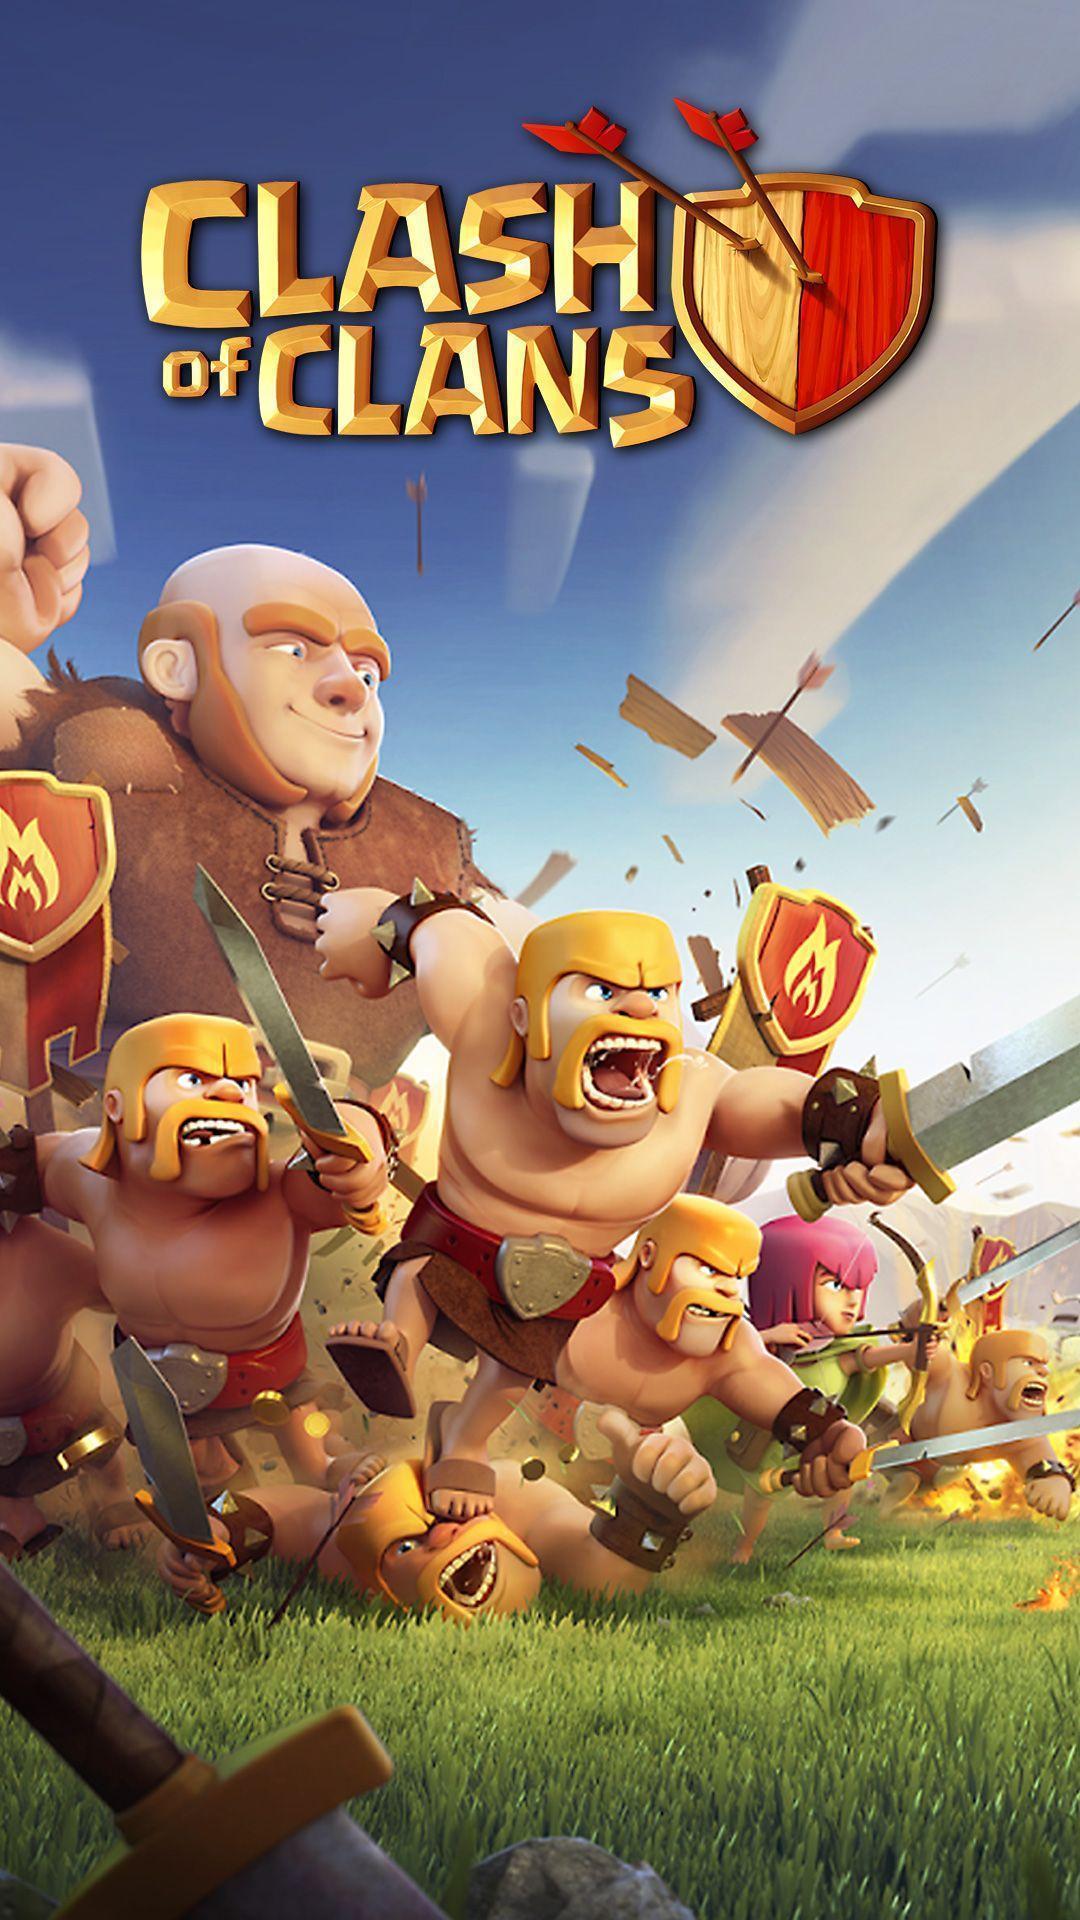 Smartphone Clash of Clans Wallpaper. Full HD Picture